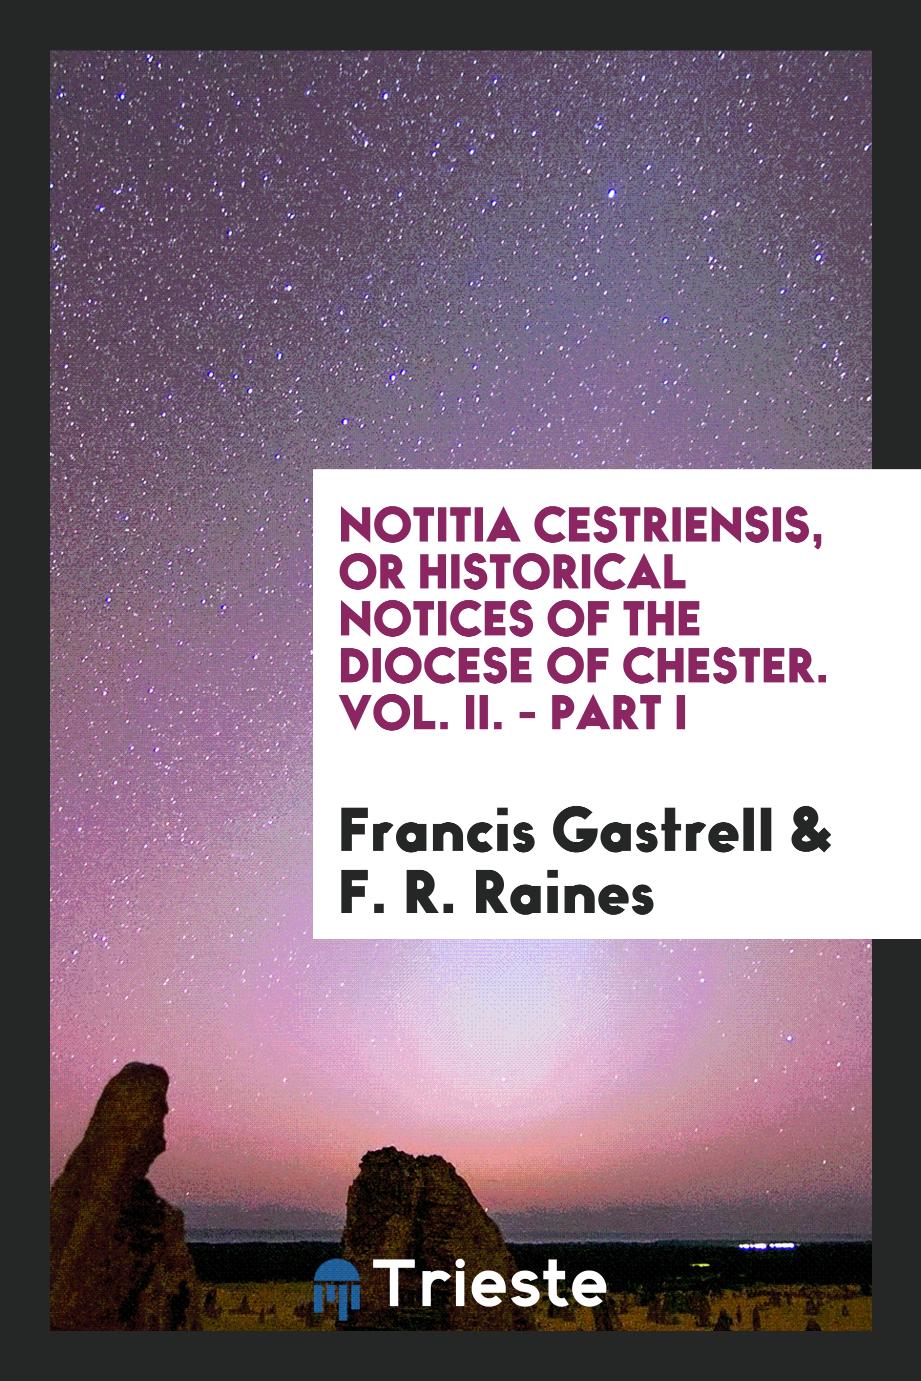 Notitia Cestriensis, or historical notices of the diocese of chester. Vol. II. - Part I